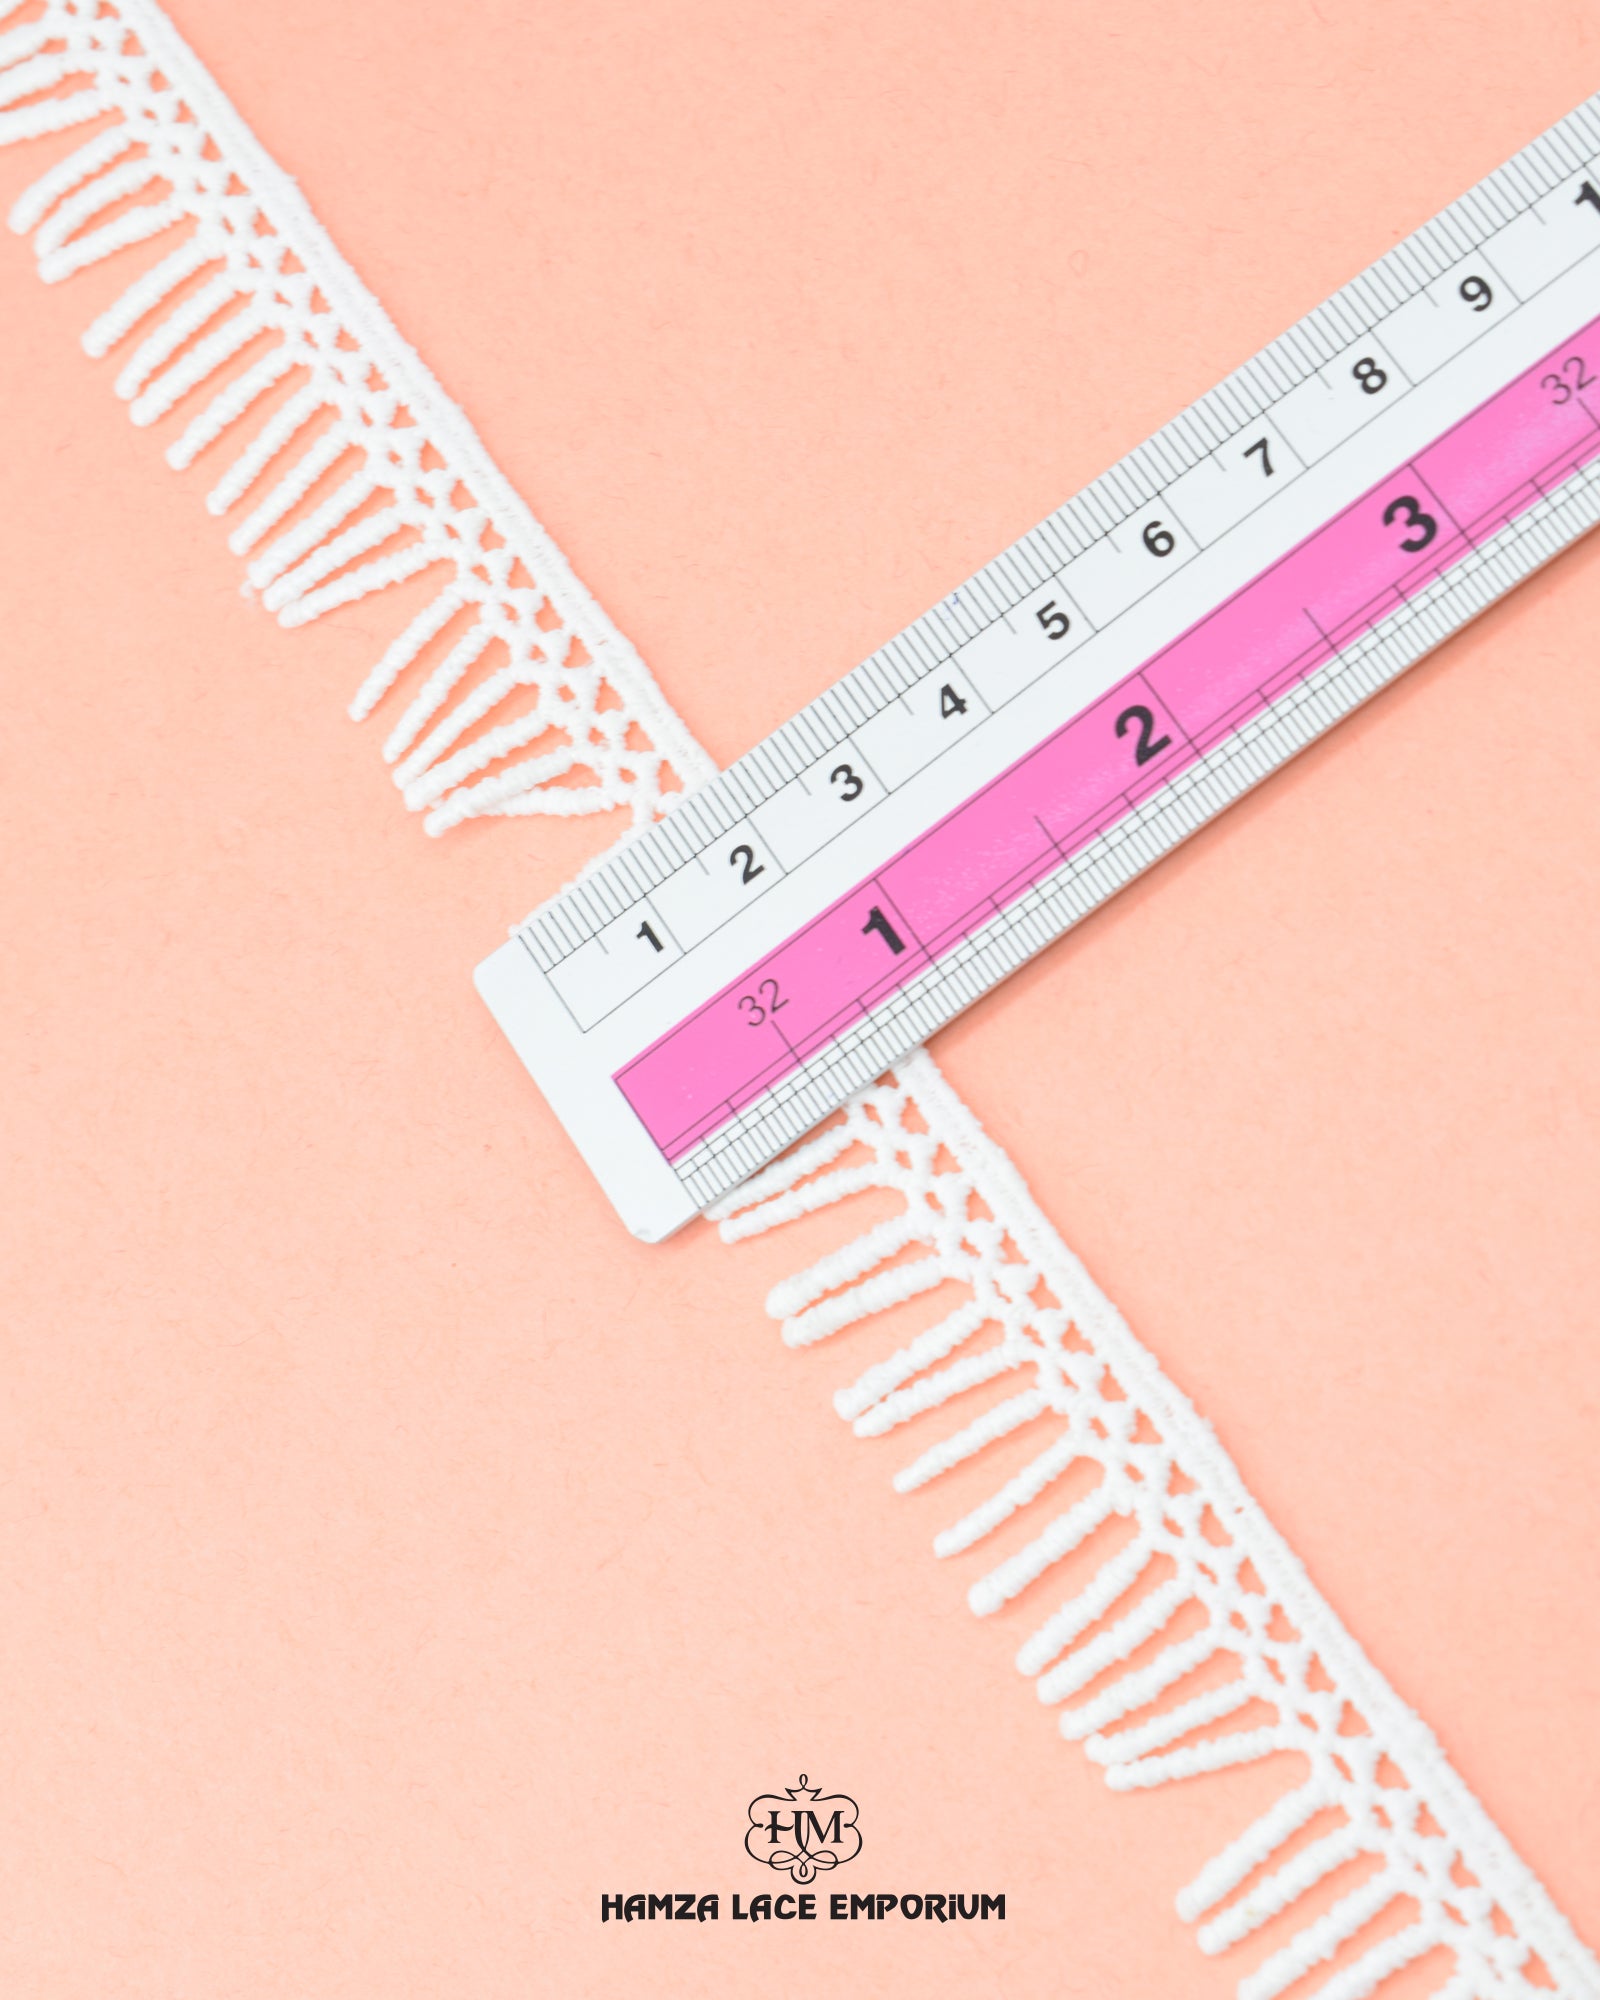 Size of the 'Edging Jhaalar Lace 22391' is shown as '1' inch with the help of a ruler